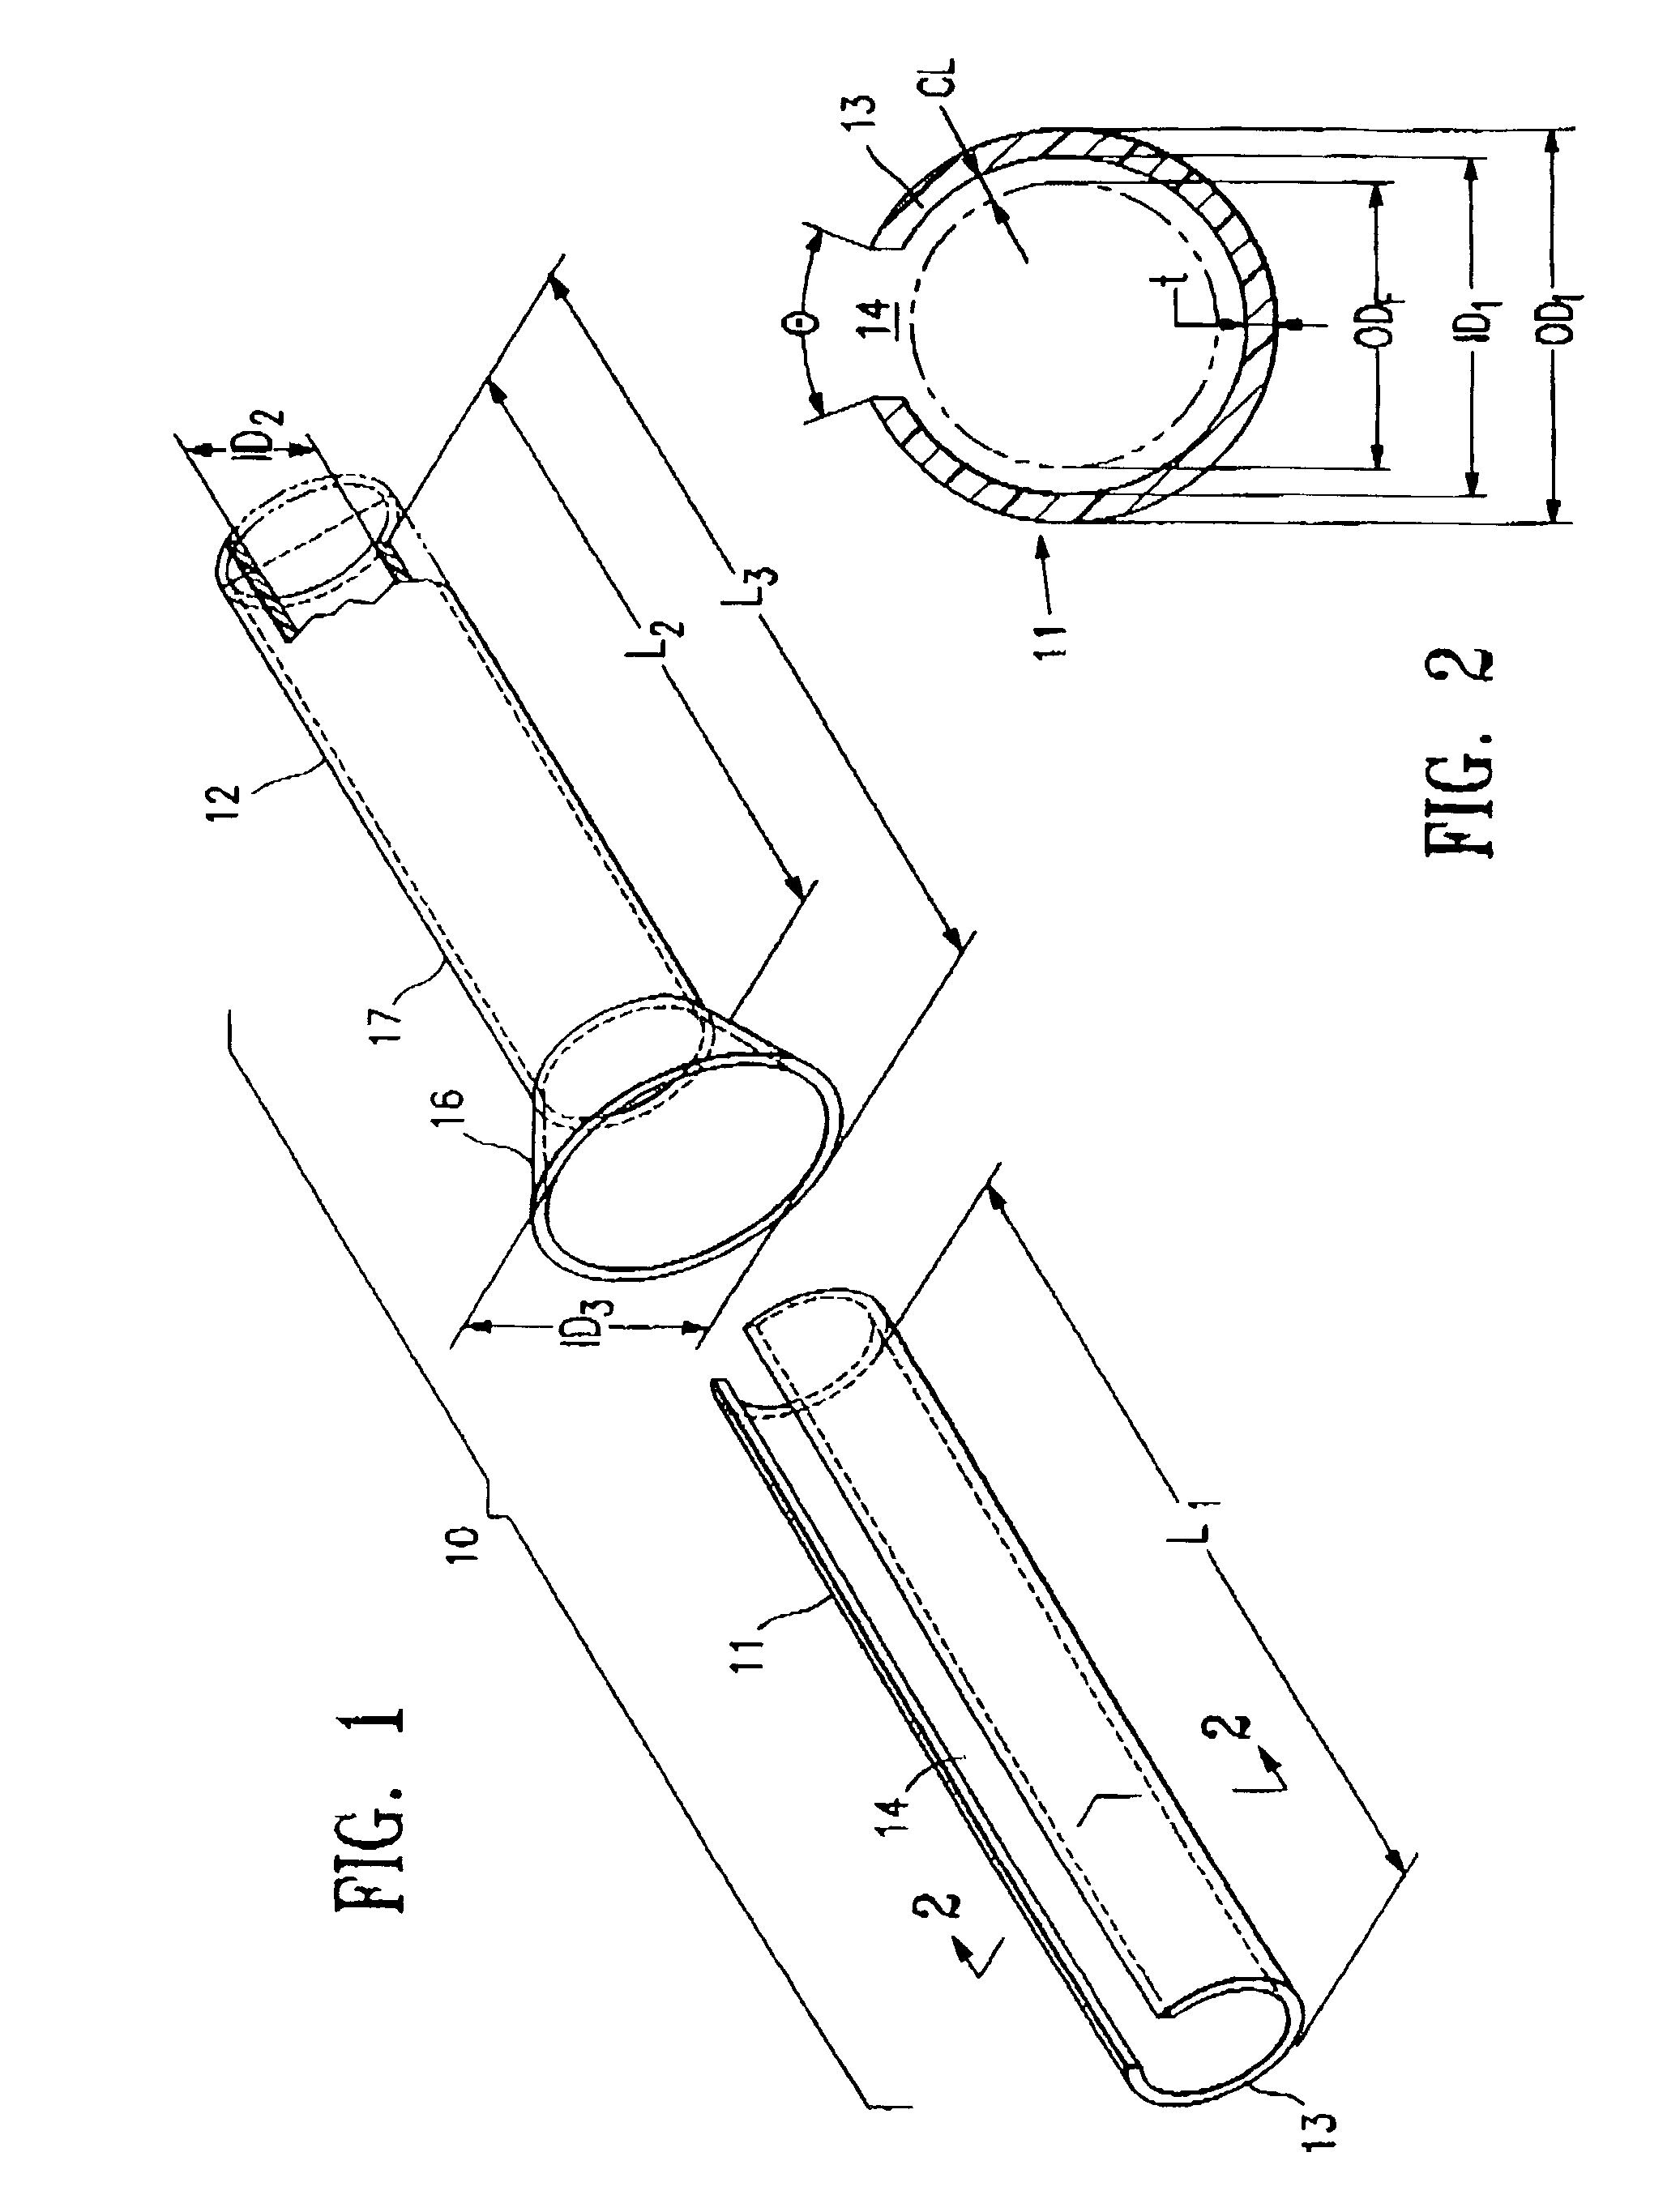 Protective sleeve assembly for a balloon catheter